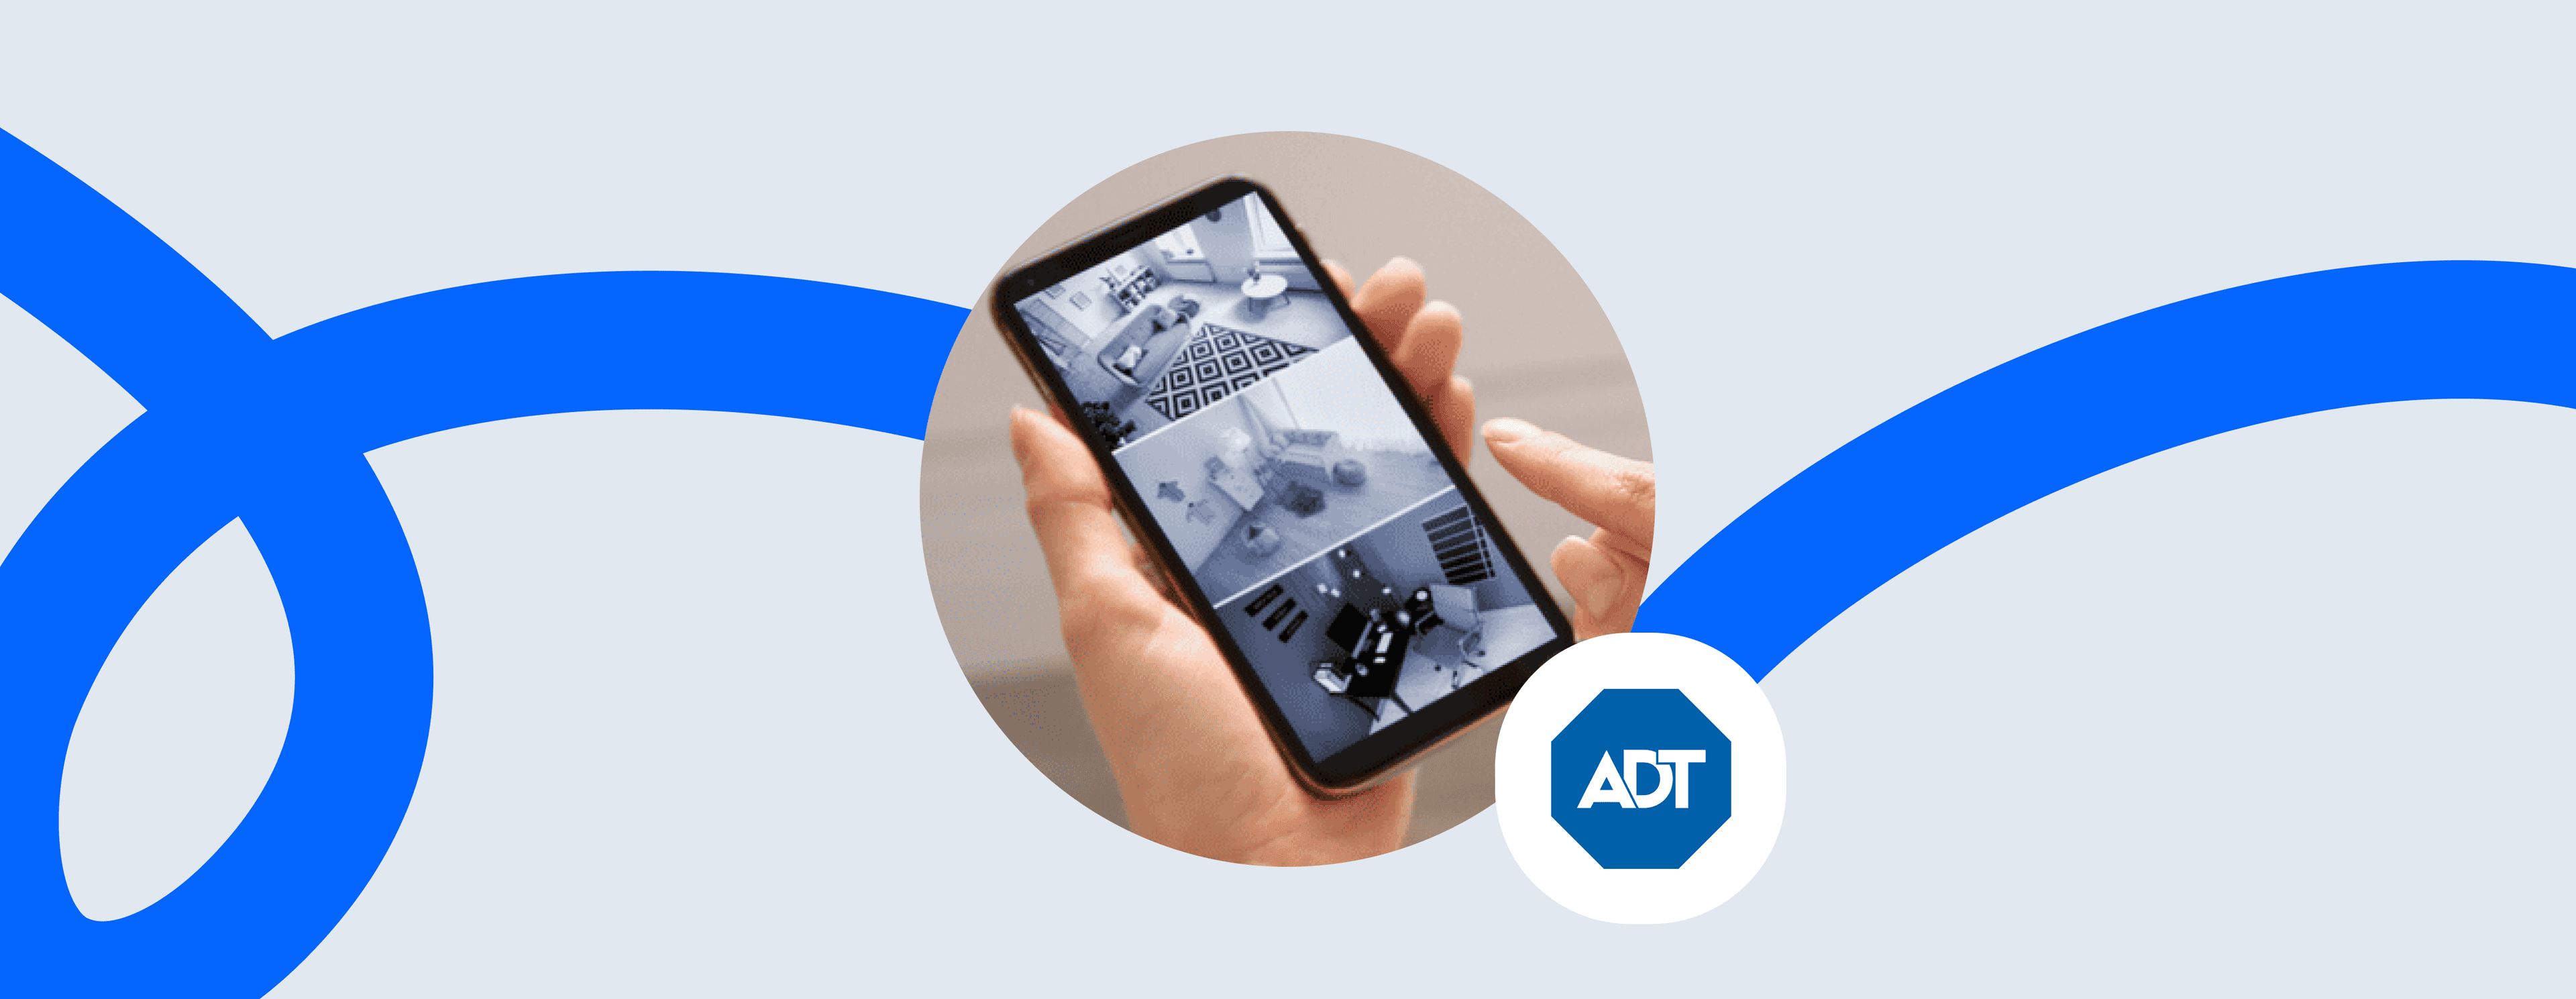 ADT Security Service Boosts Sales By 17% Using Tidio